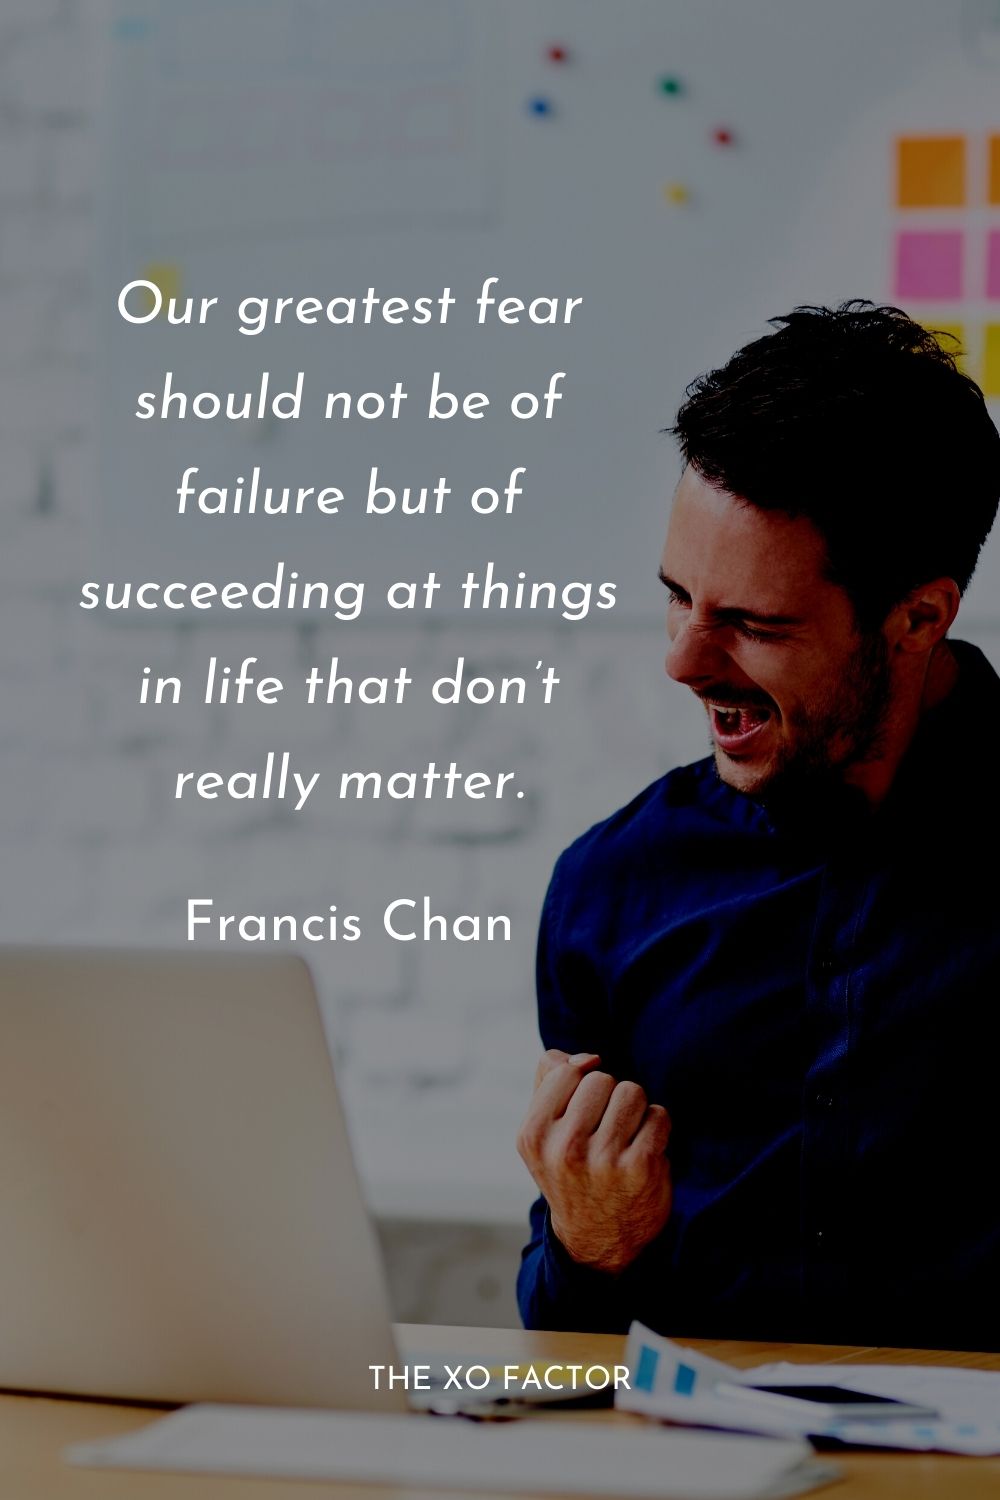 Our greatest fear should not be of failure but of succeeding at things in life that don’t really matter. Francis Chan